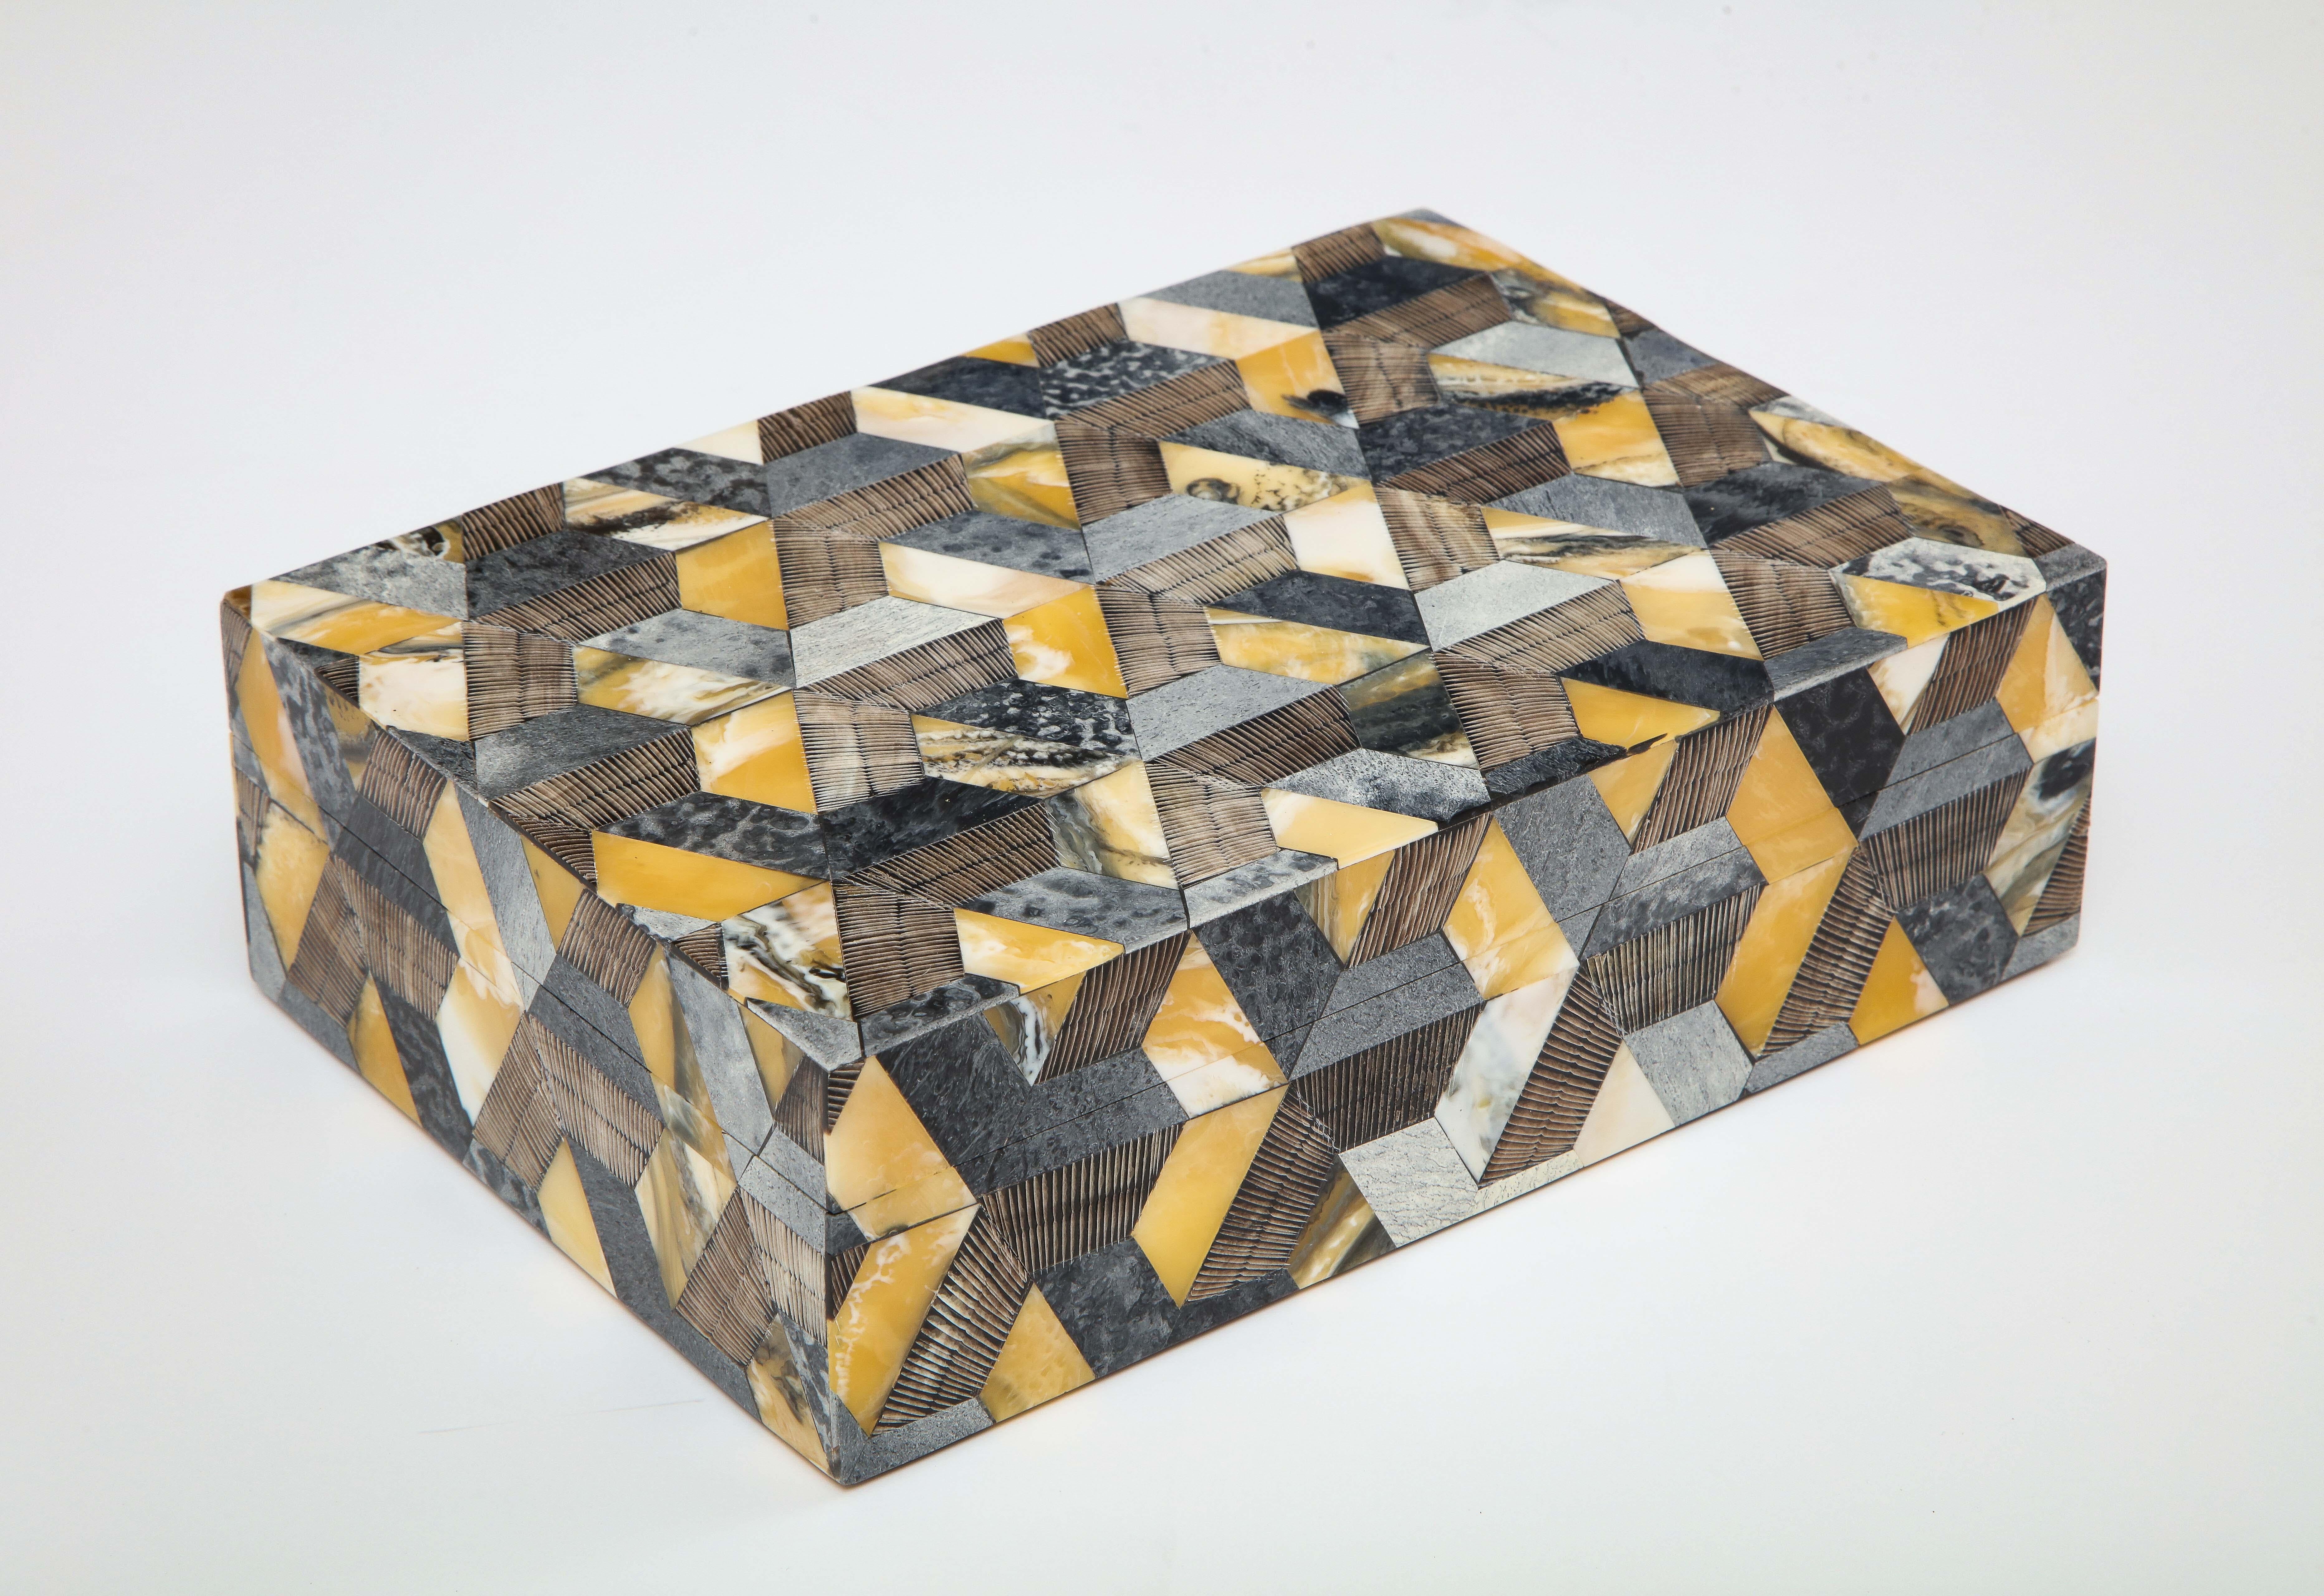 Decorative keepsake box with a mosaic graphic pattern made from natural horn and bone tiles, some with hand incised pattern, lined in wood.